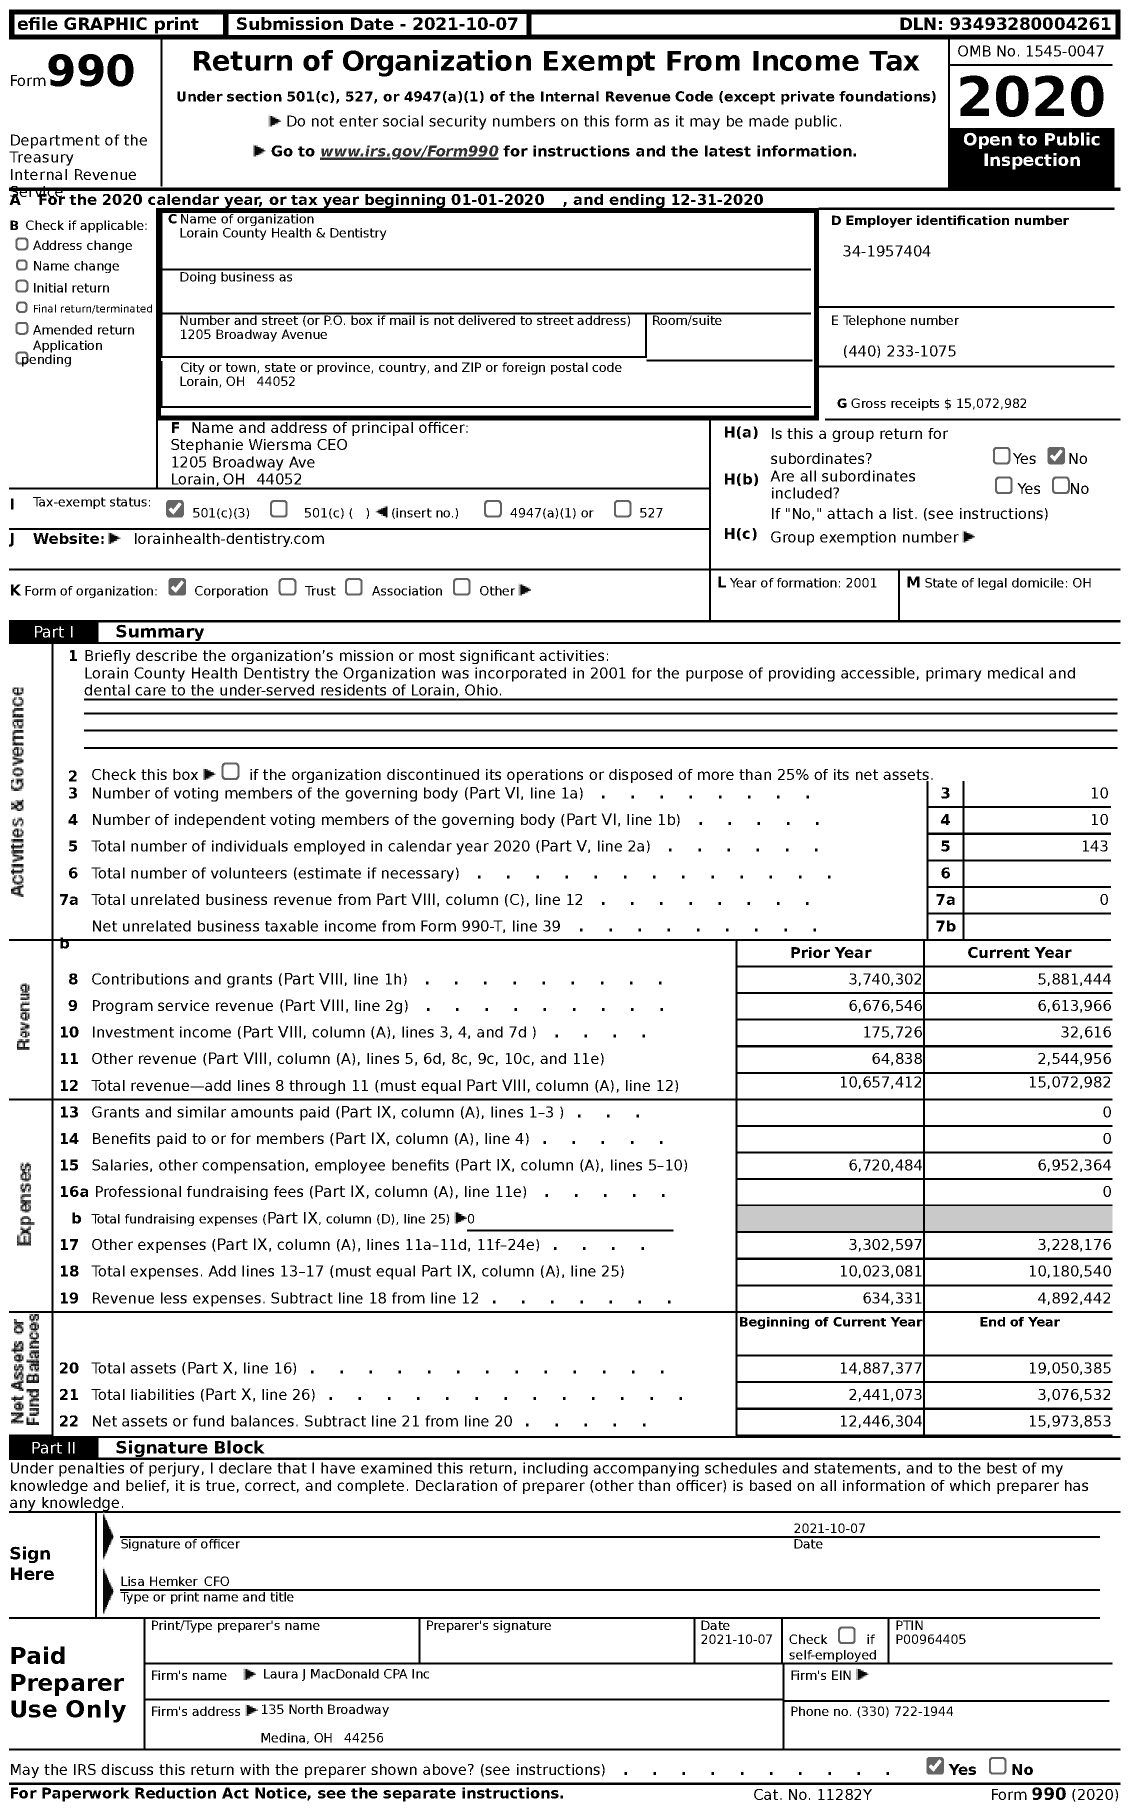 Image of first page of 2020 Form 990 for Lorain County Health and Dentistry (LCH&D)